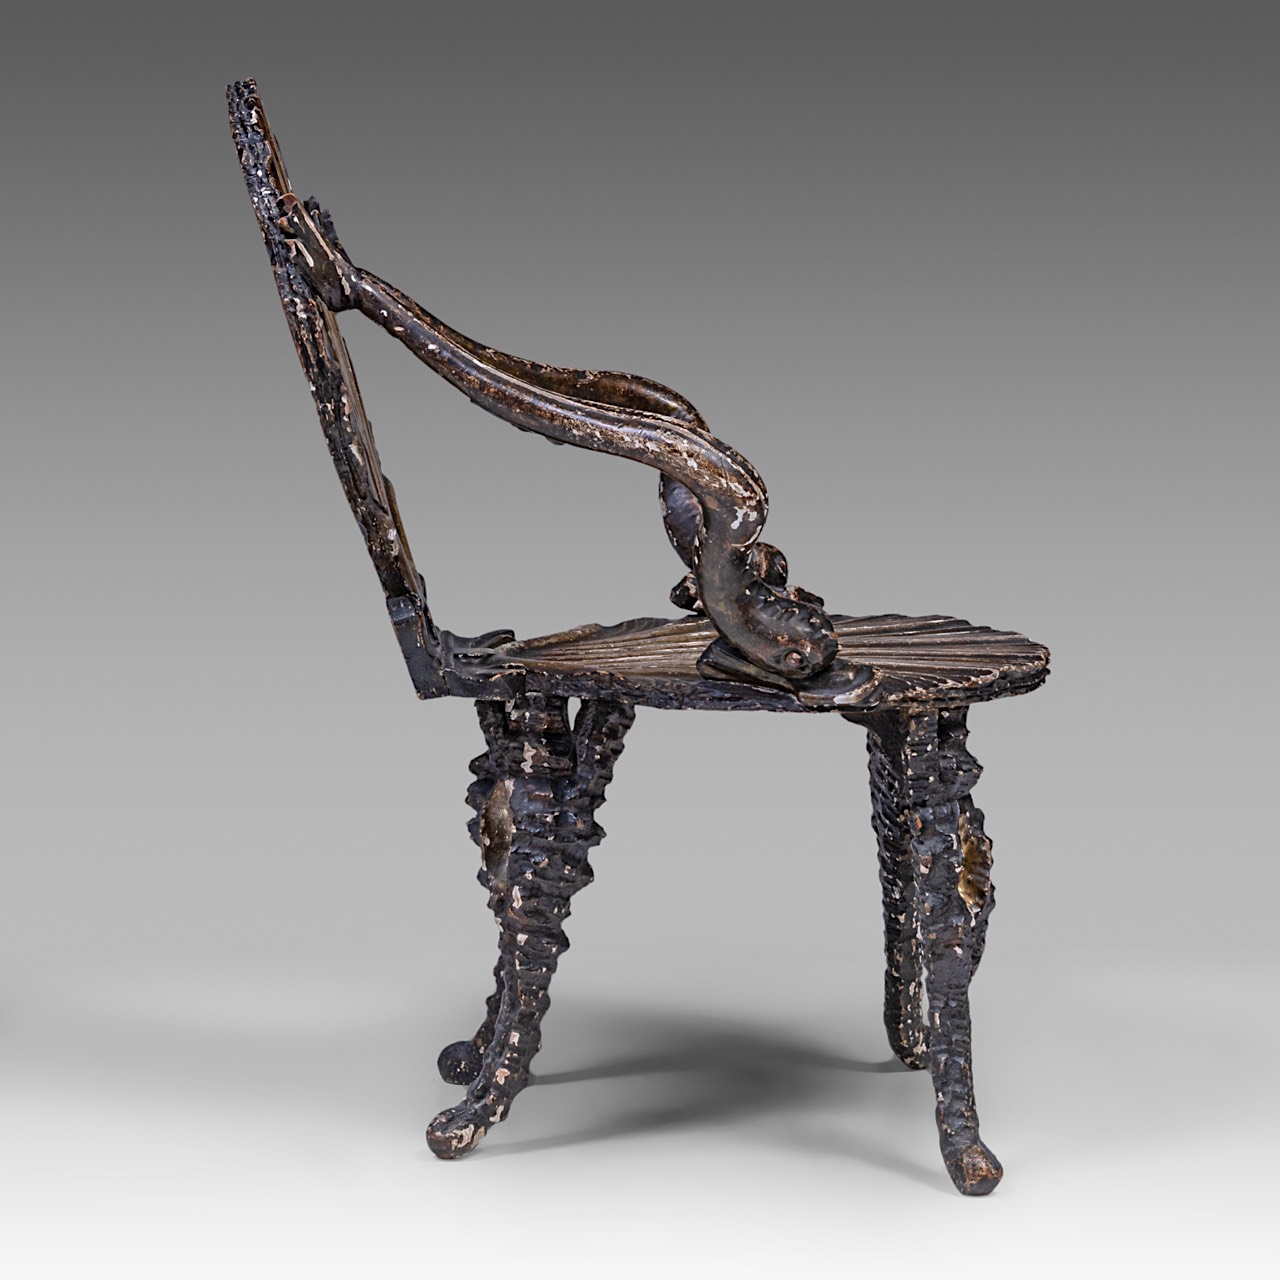 A Venetian 'Grotto' chair, patinated carved wood and stucco, 19thC, H total 84 cm - H seat 40,5 cm - - Image 6 of 8